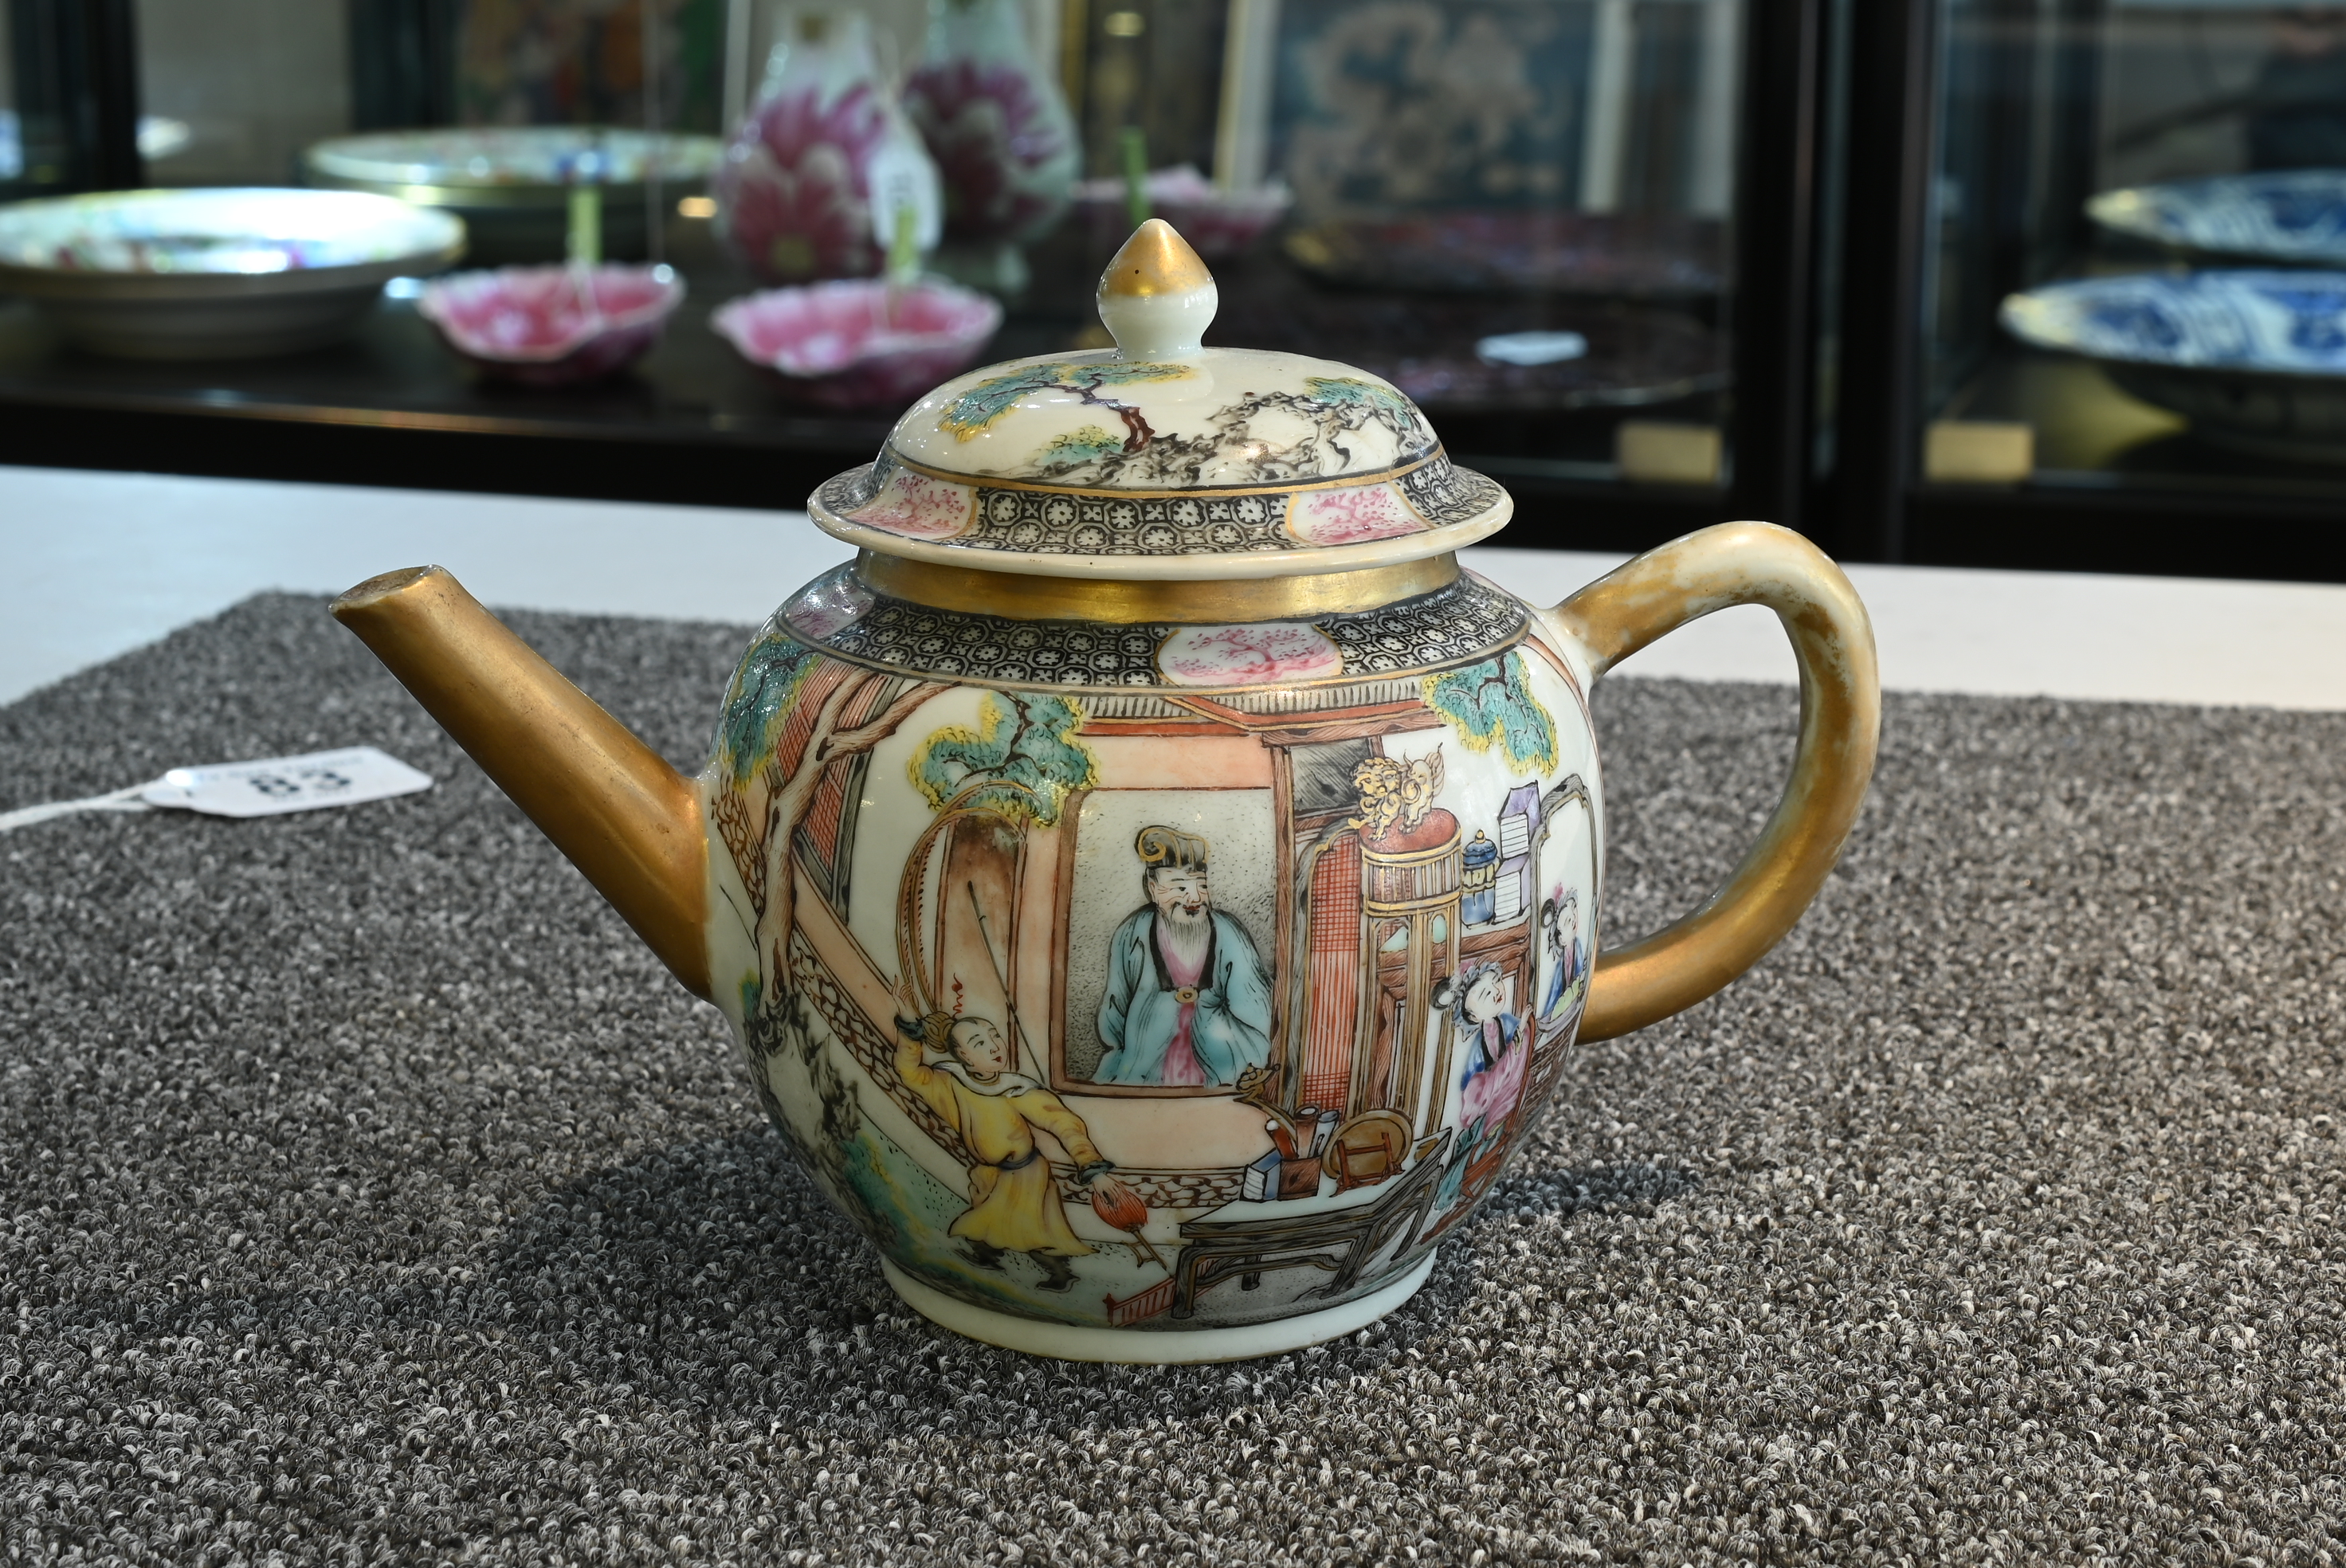 A FINE CHINESE FAMILLE ROSE PORCELAIN TEAPOT, 18TH CENTURY - Image 8 of 21